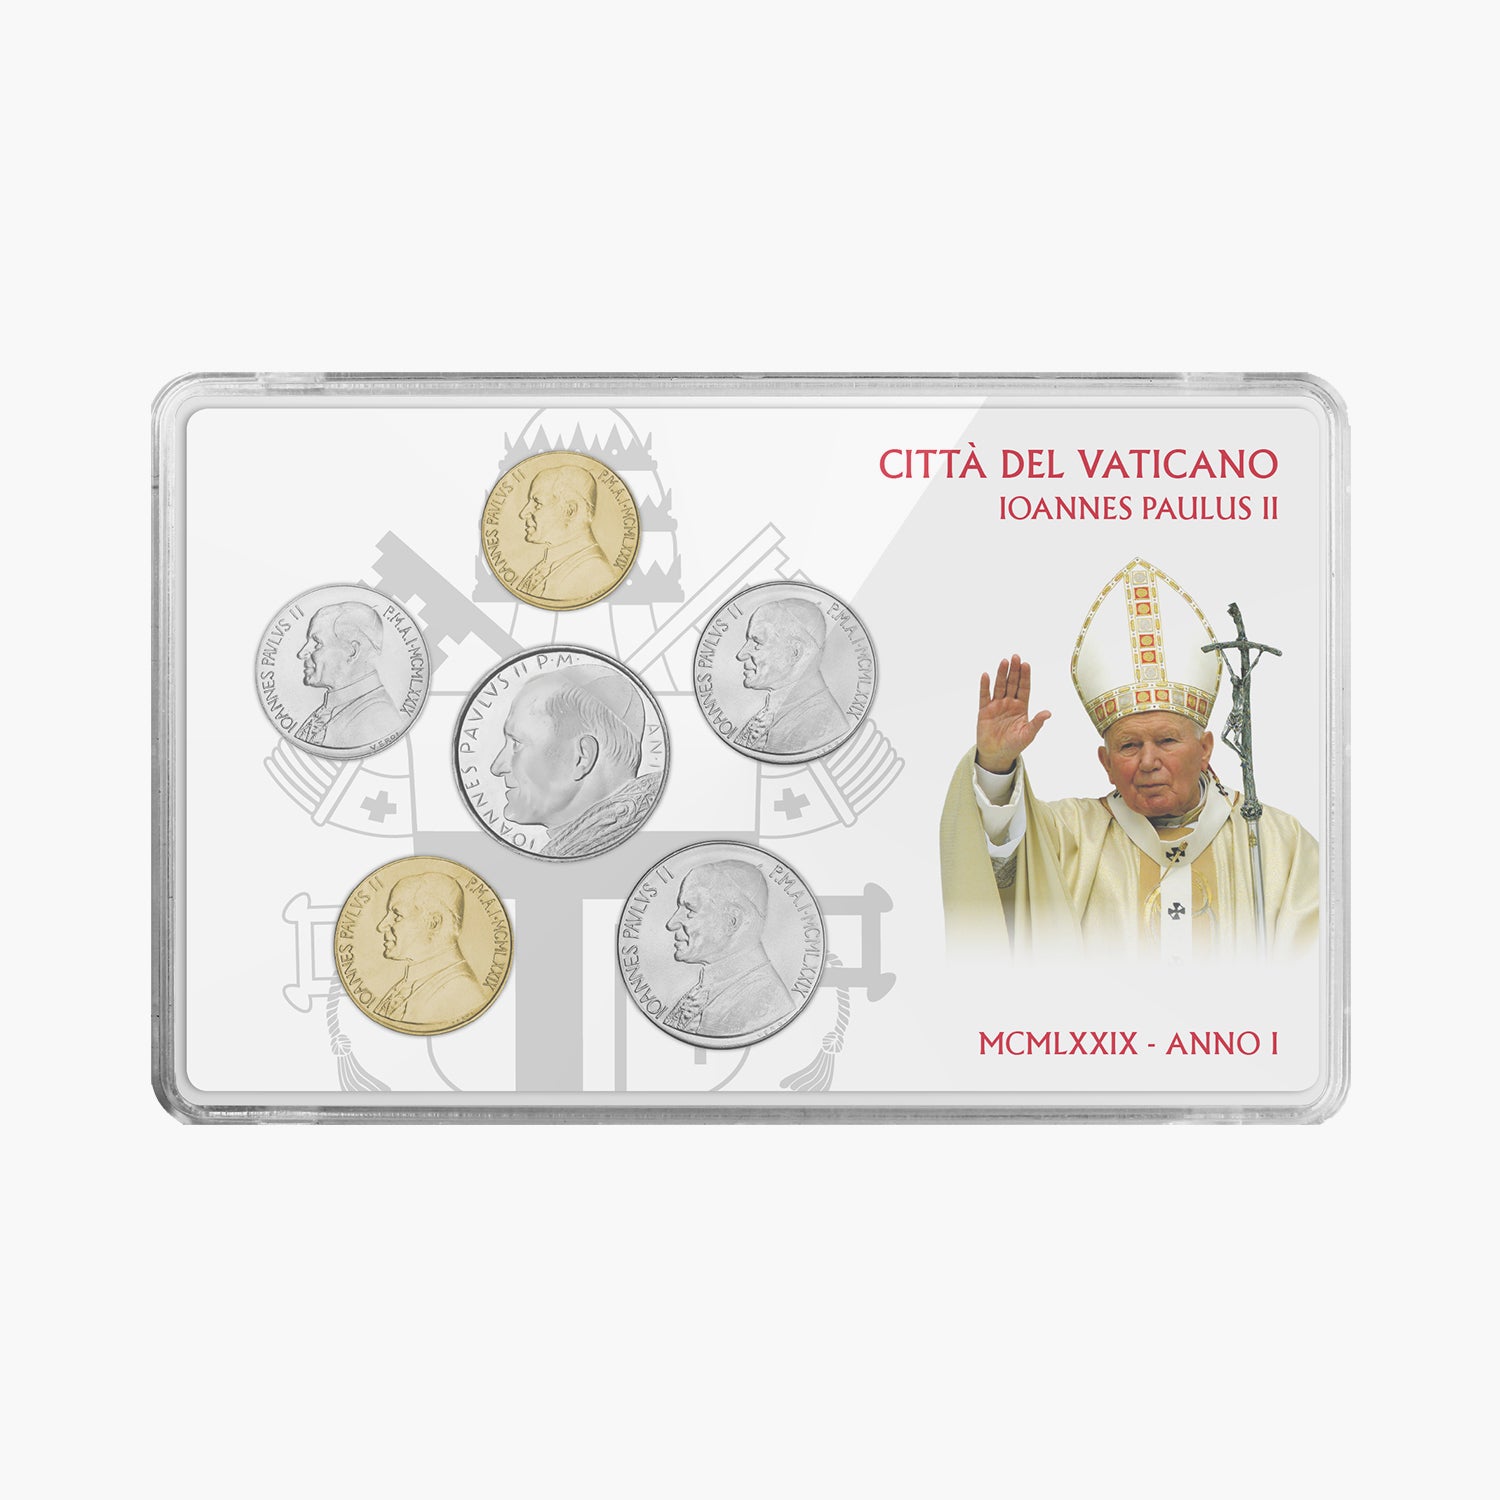 Complete First Issue Coin Set of Pope John Paul II